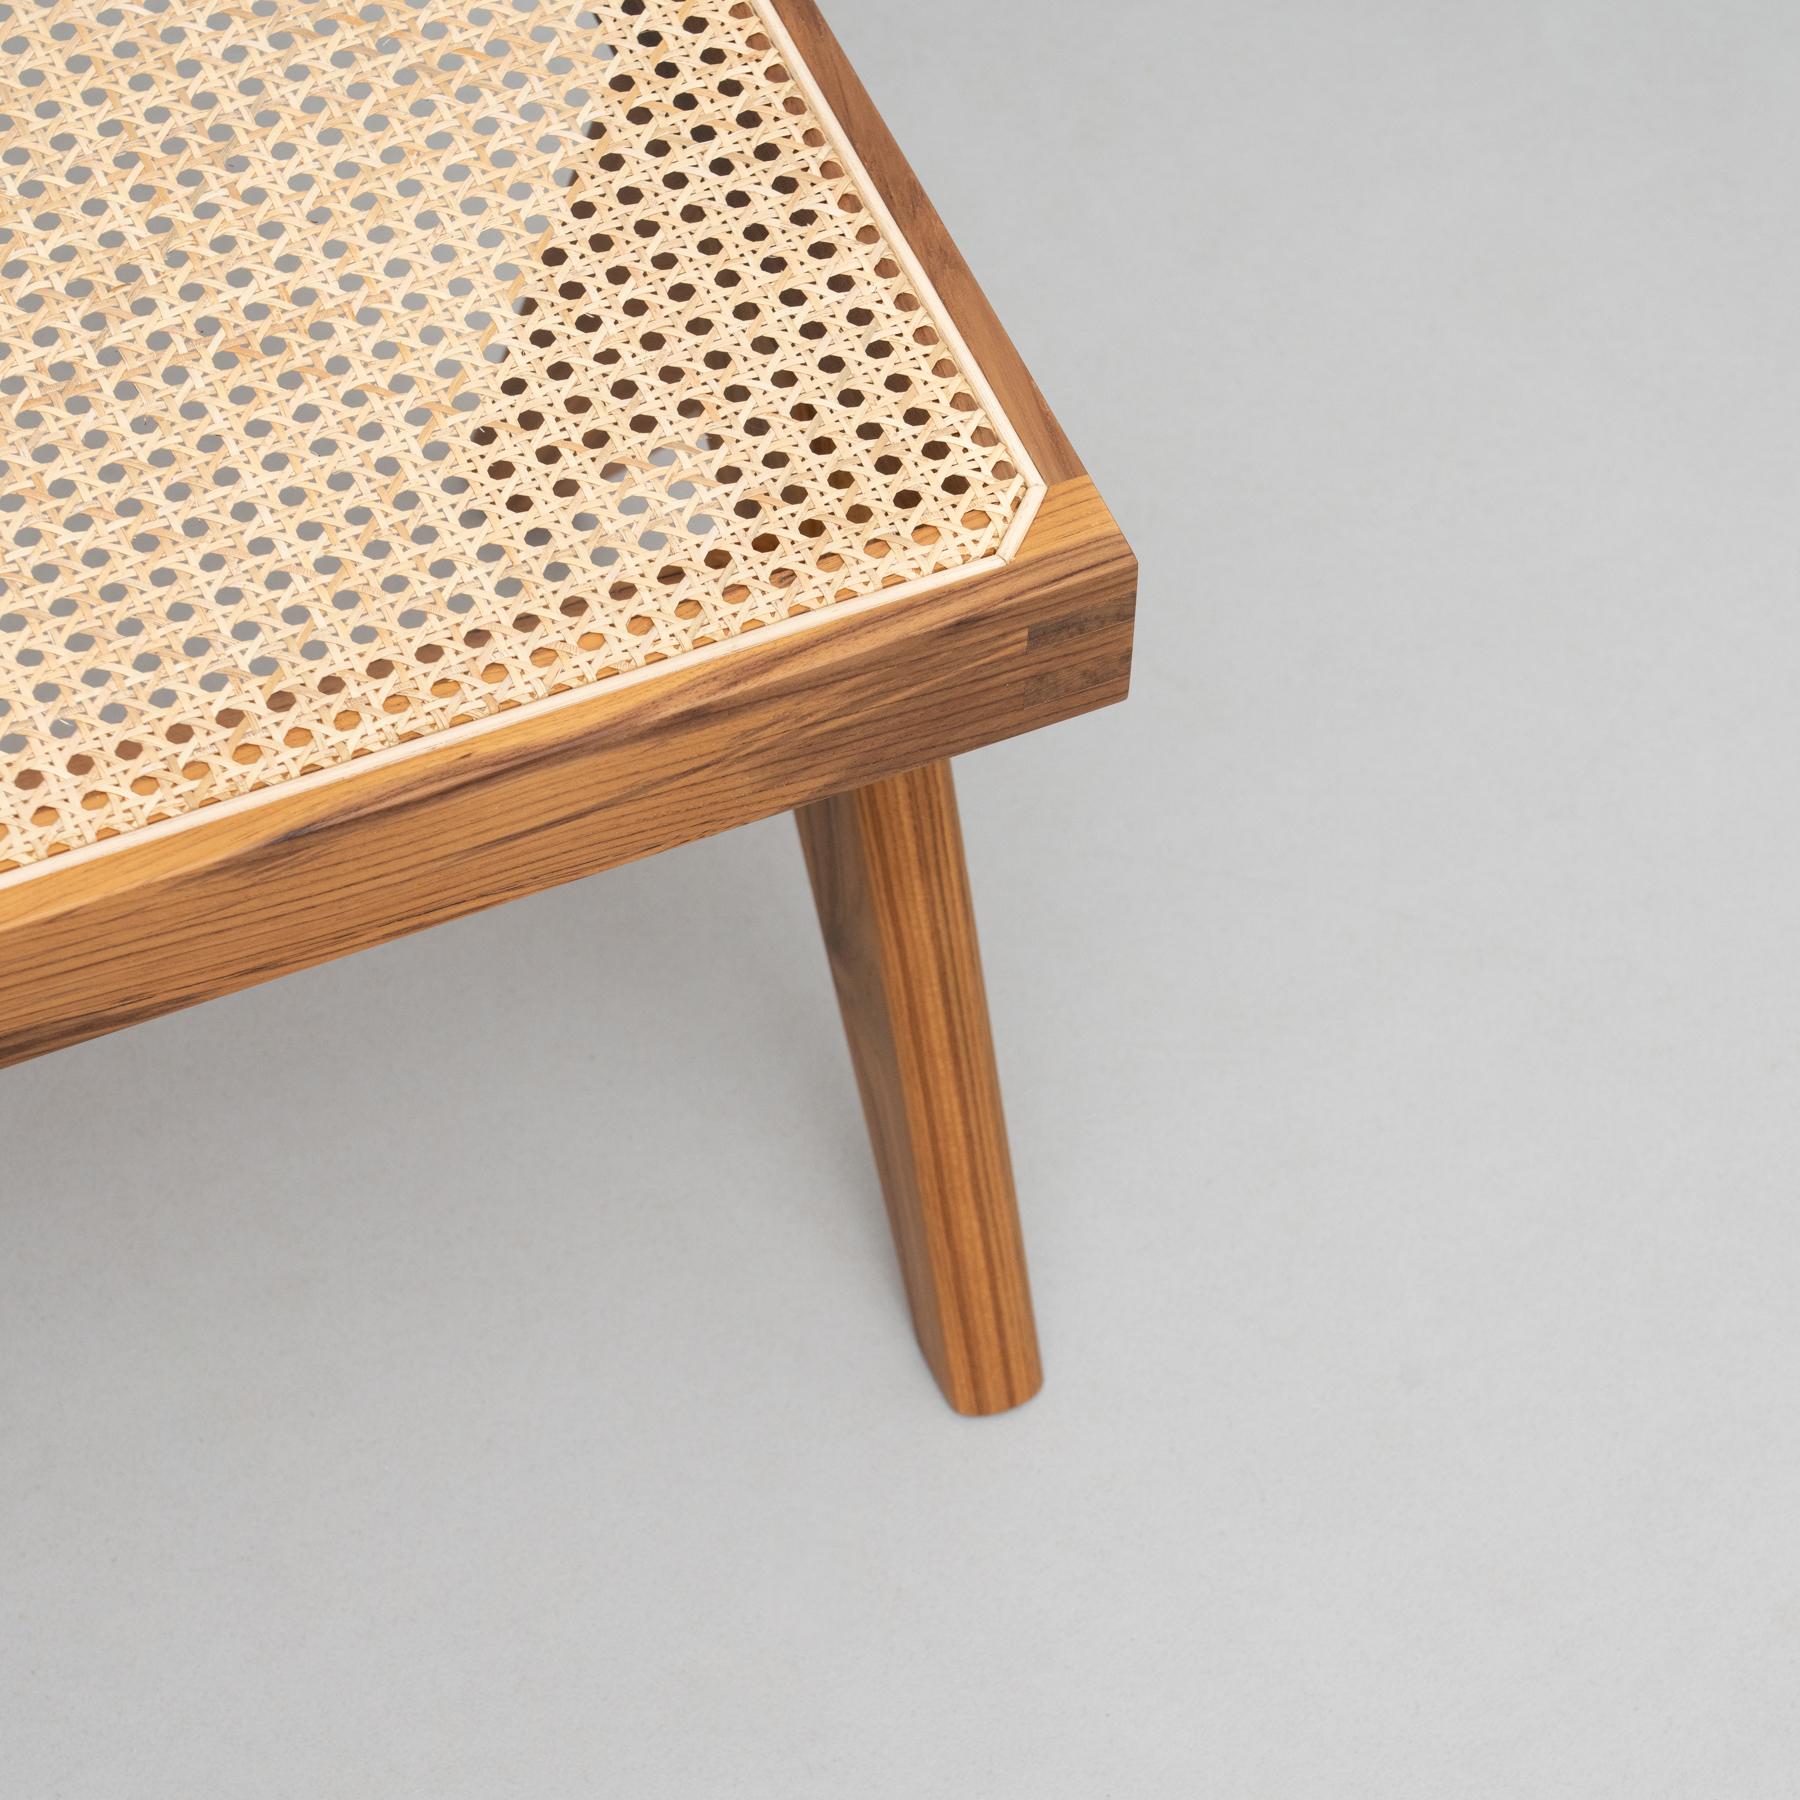 Pierre Jeanneret 057 Civil Bench, Wood and Woven Viennese Cane 10